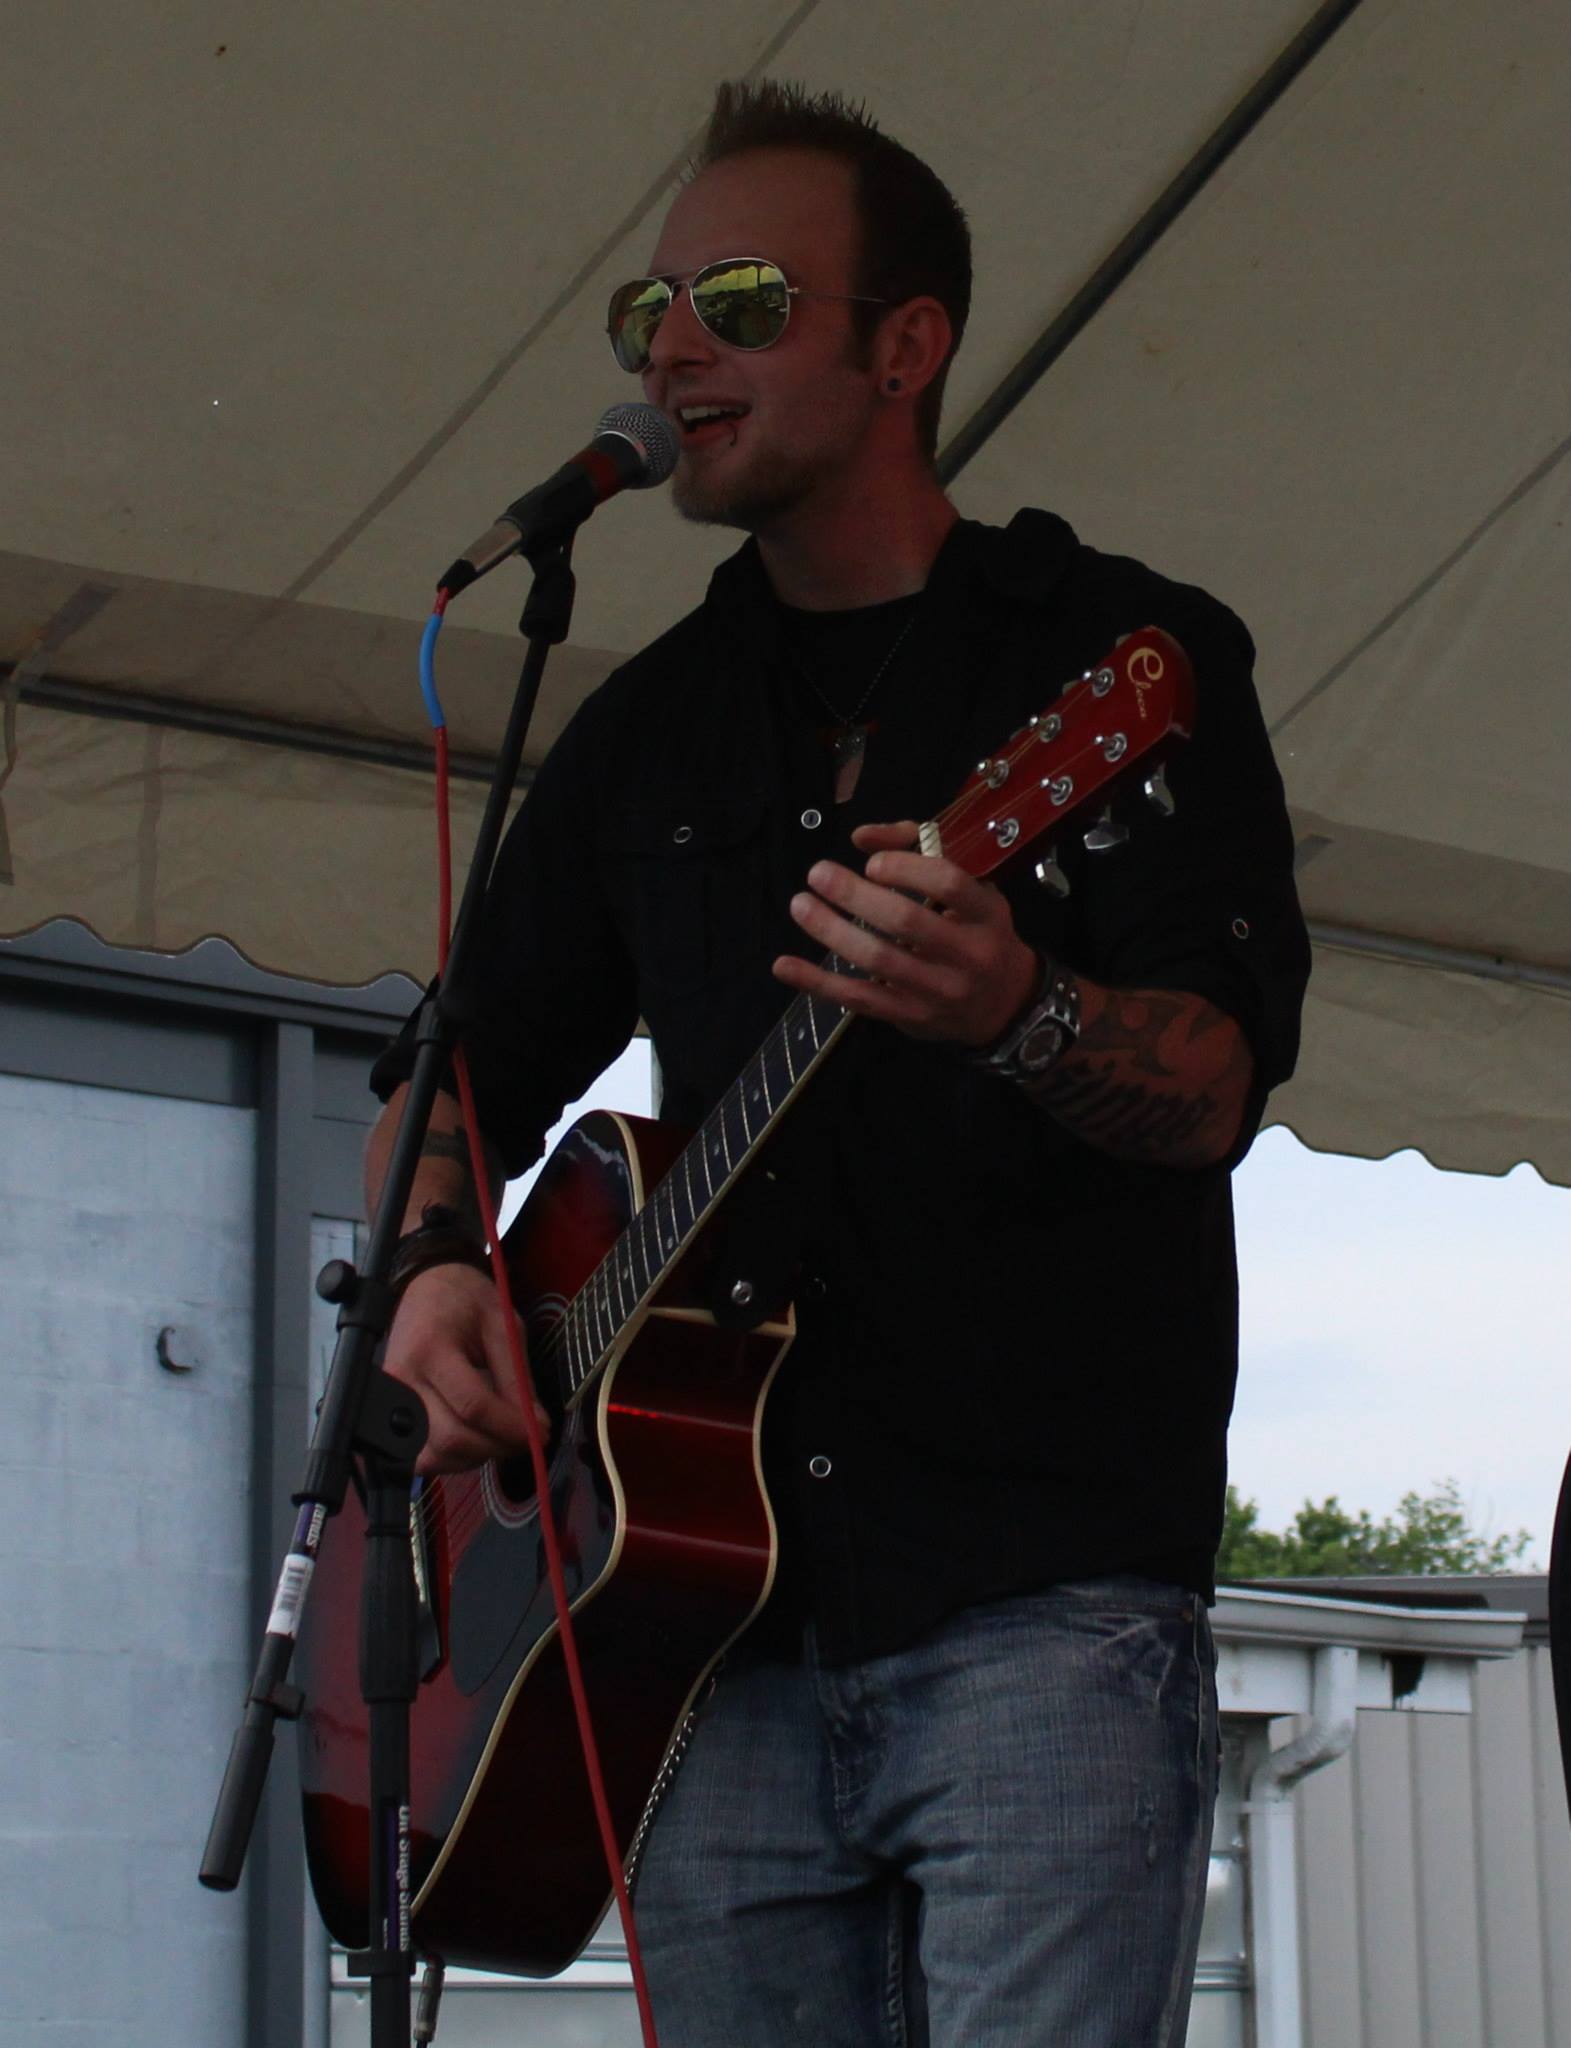 Dustin Blackwood performing at Mickey's Bar & Grill in Manchester, Tenn. on June 7, 2015. The performance was a part of MusicTree: A Festival of the Arts. (MTSU Sidelines / Michael Patton)